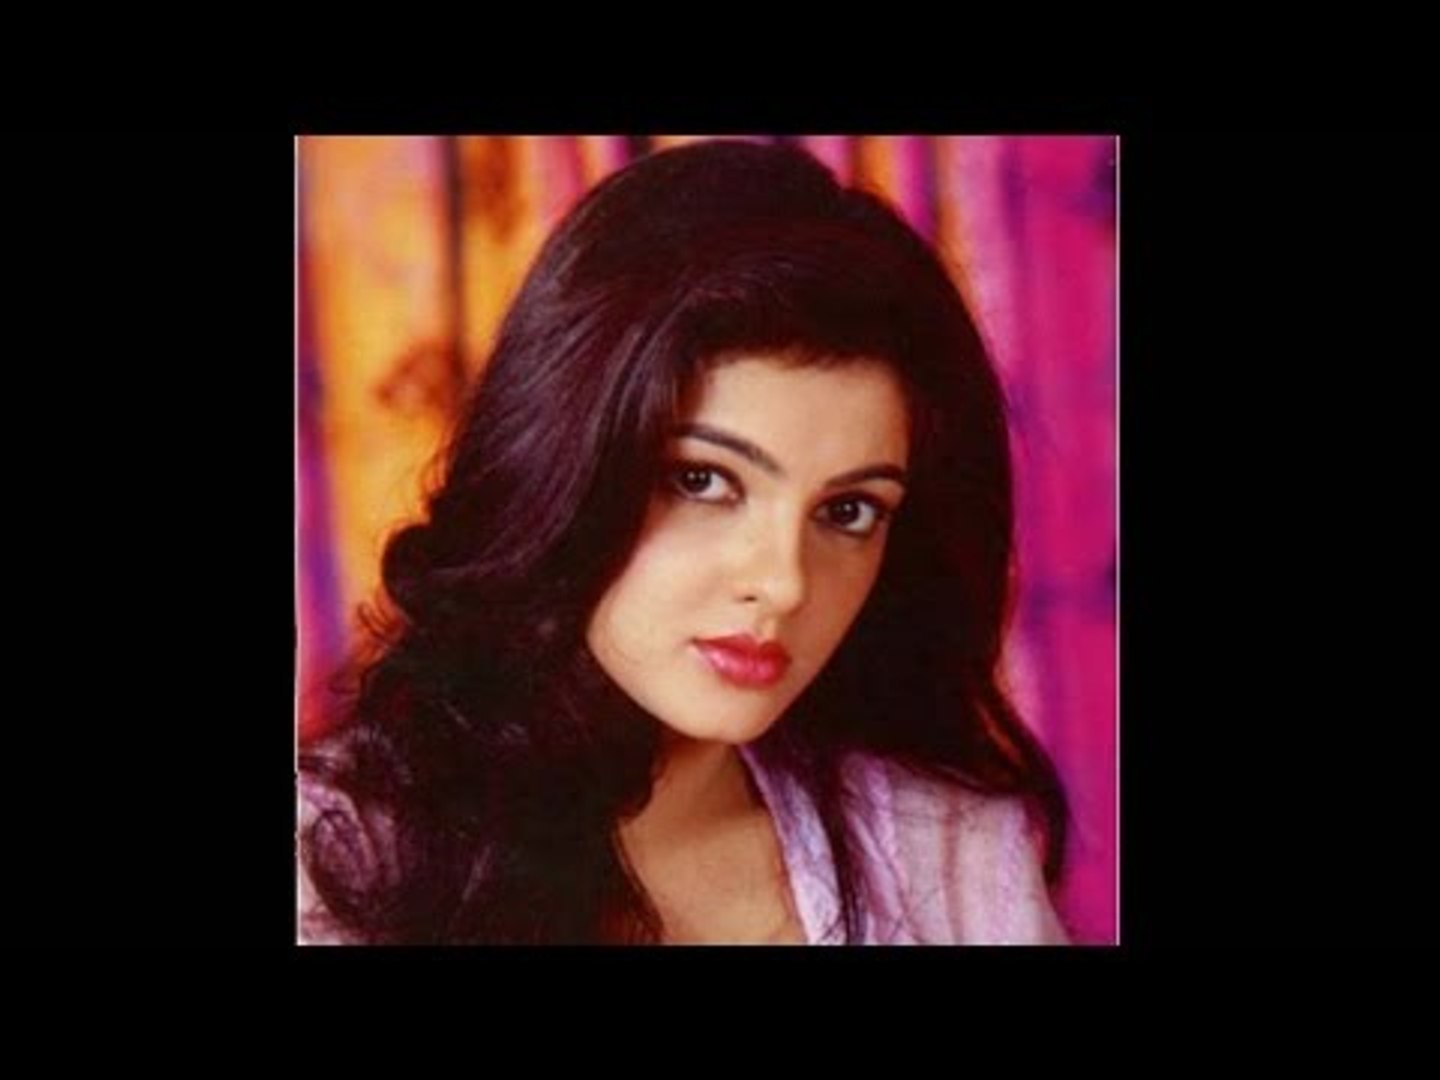 Mamta Sex - Mamta Kulkarni named as accused by Thane police in drug racket case |  Oneindia News - video Dailymotion